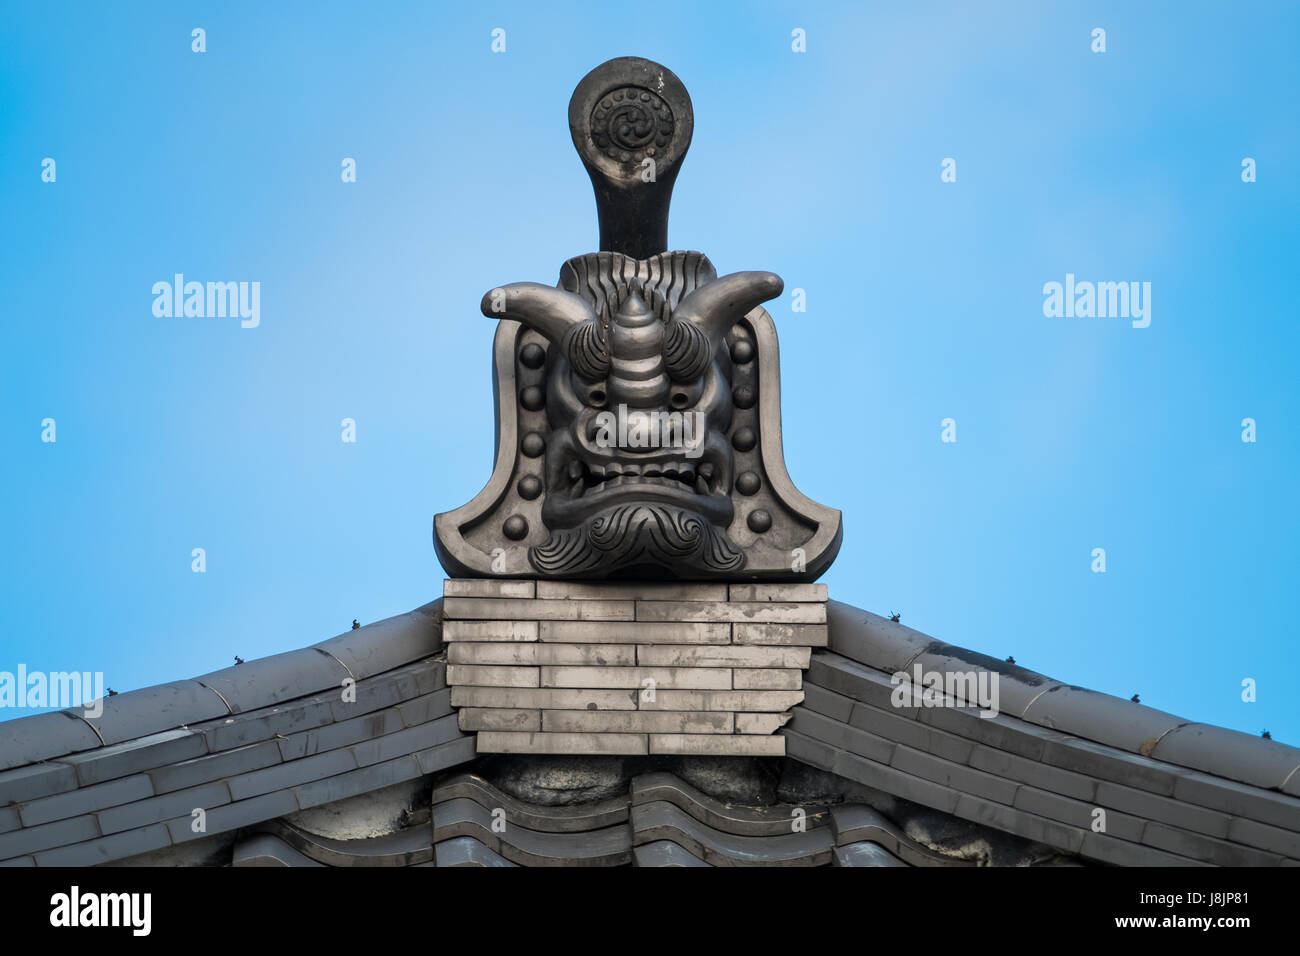 Traditional Japanese architecture and rooftop gargoyles. Stock Photo